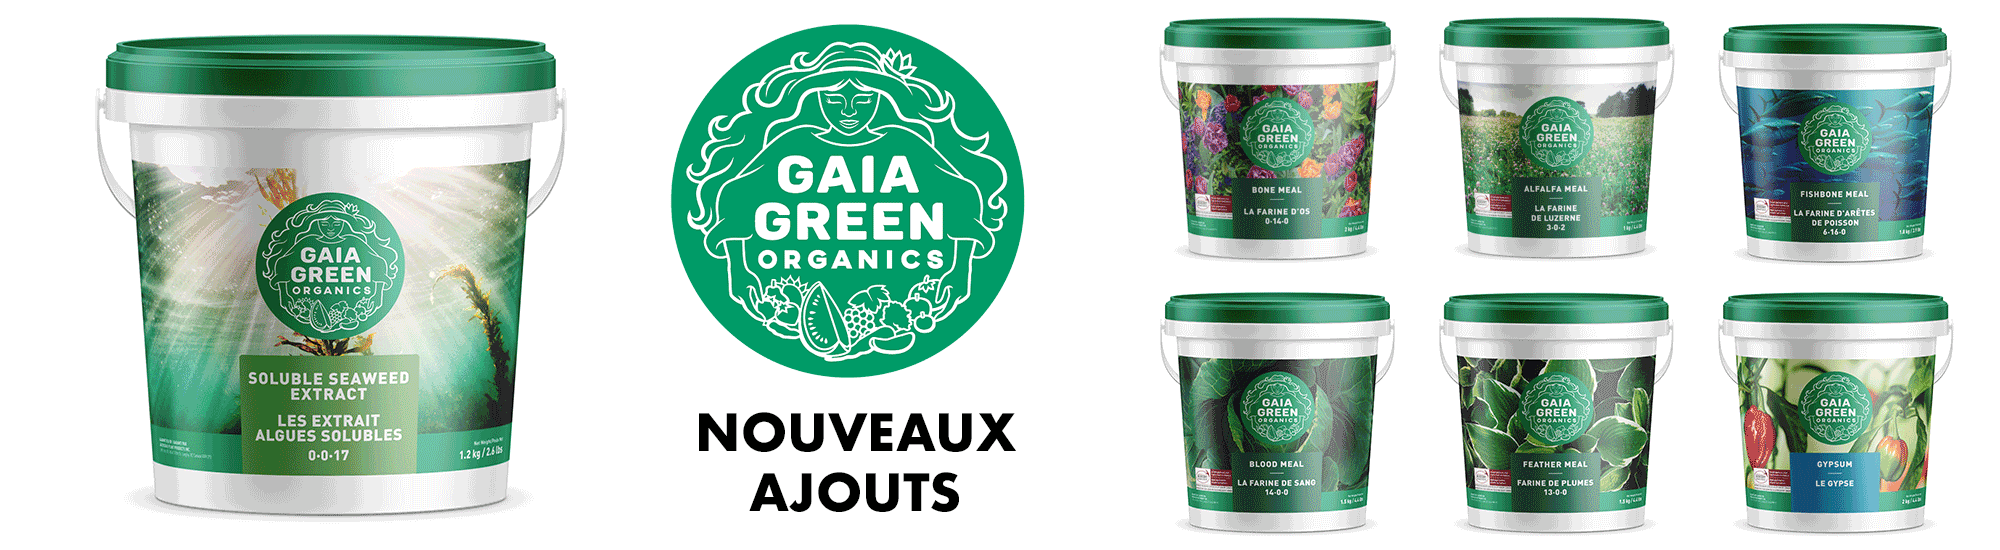 gaia-green-new_products_fr